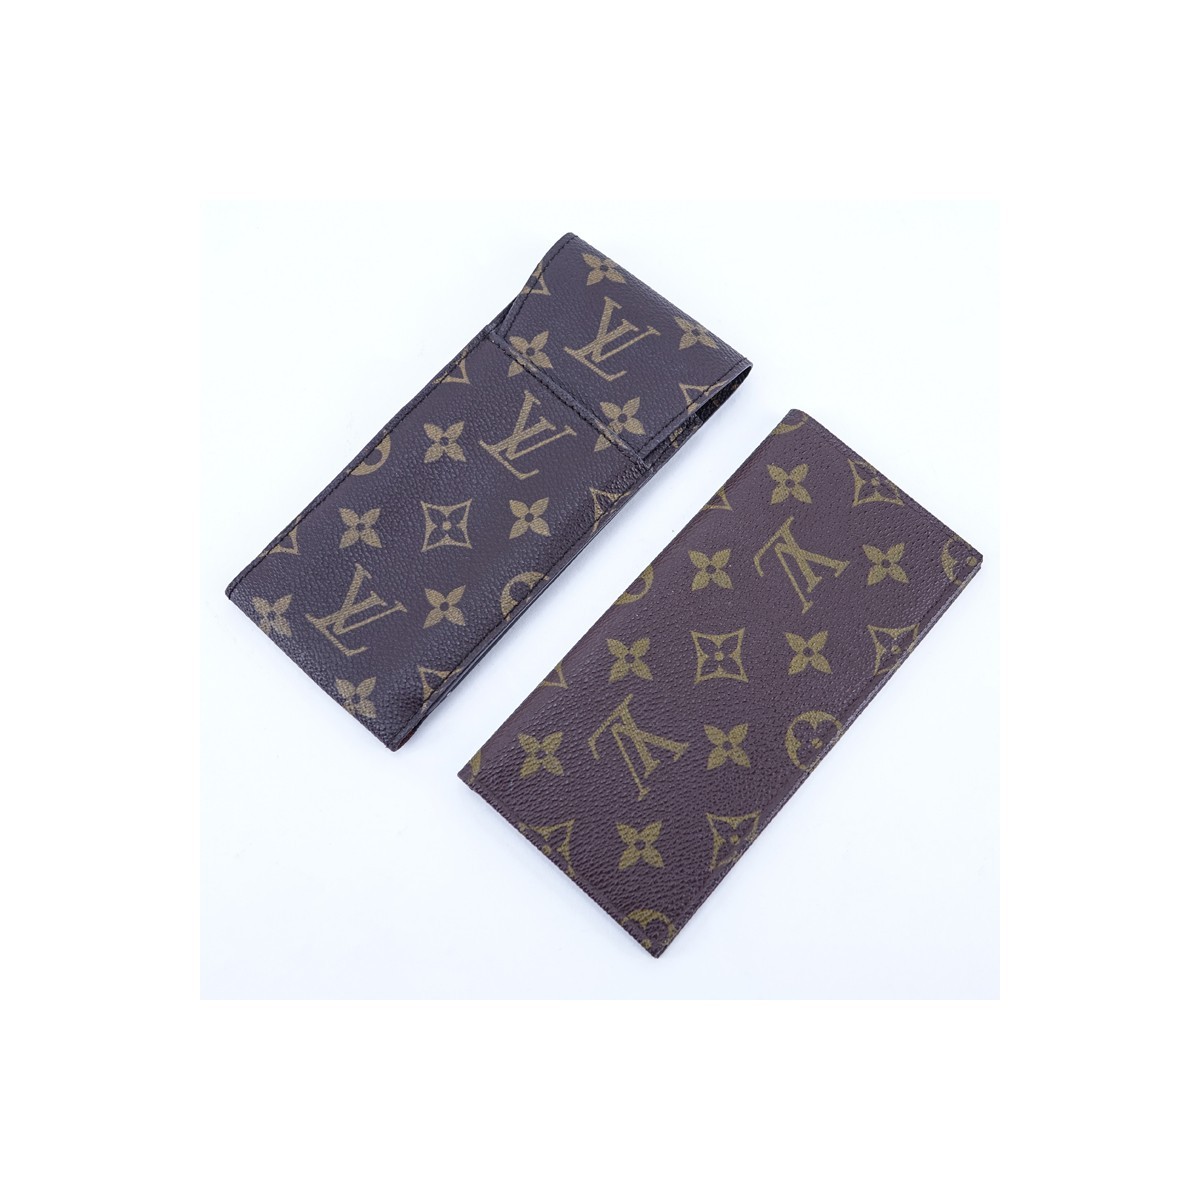 Two (2) Louis Vuitton Brown Monogram Coated Canvas Accessories. Includes checkbook holder and eyeglass case.